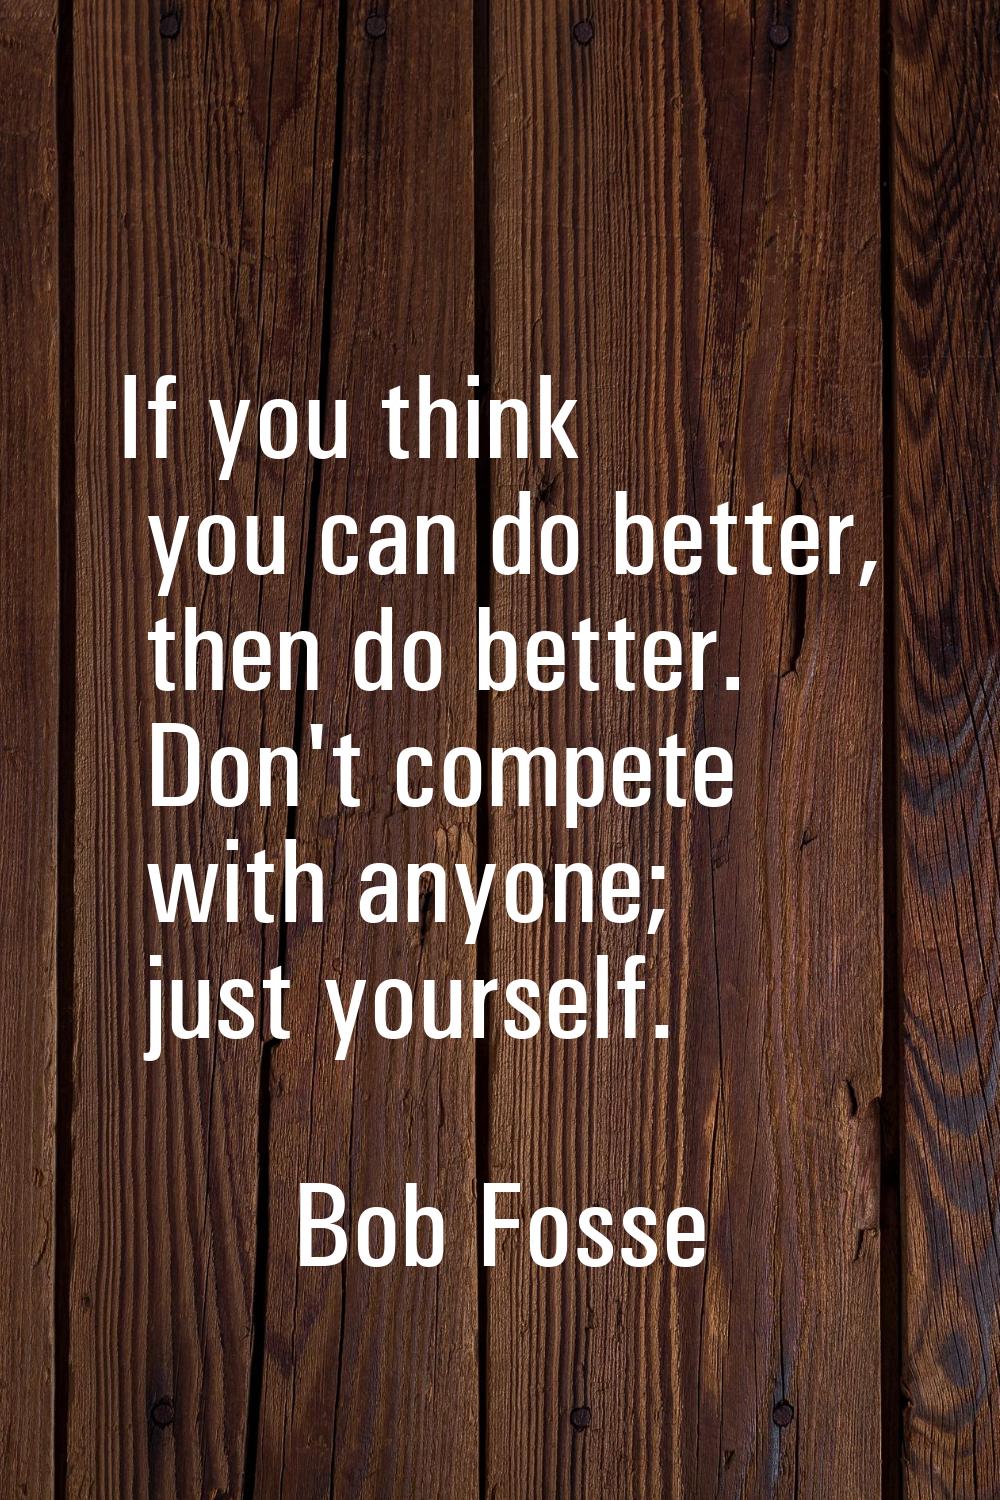 If you think you can do better, then do better. Don't compete with anyone; just yourself.